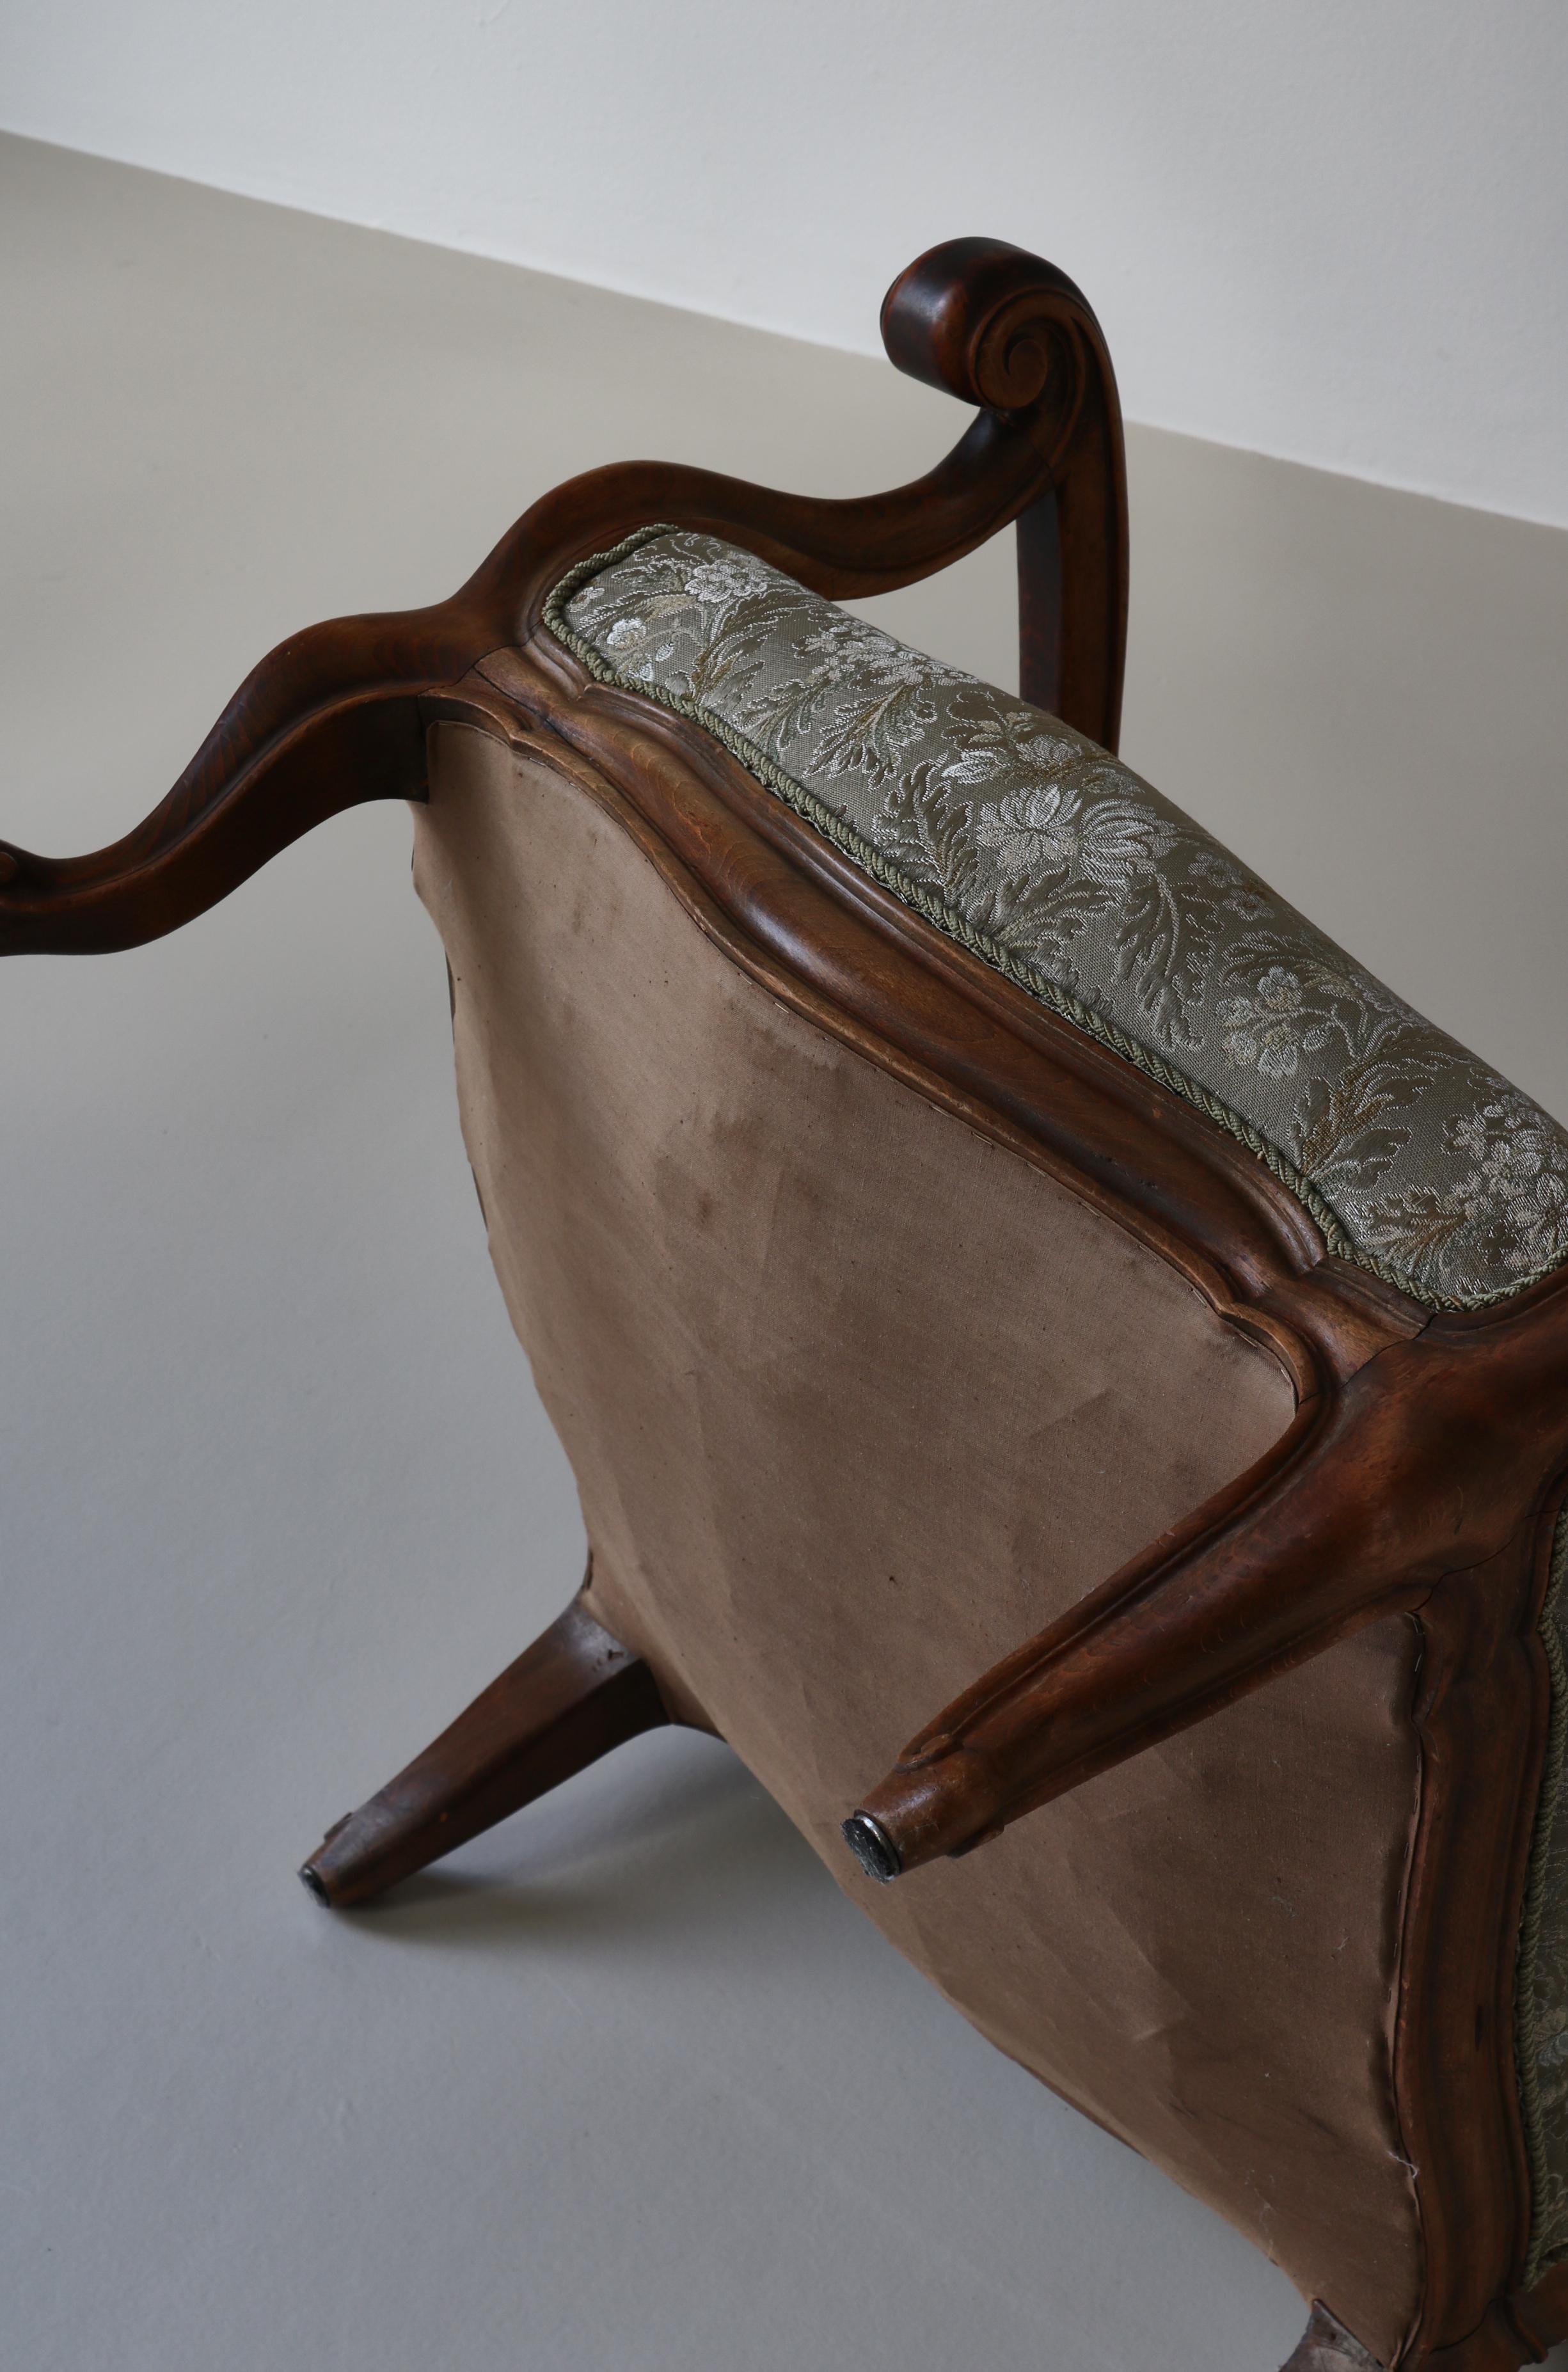 Bergére Chair Rococo Revival by Danish Cabinetmaker, Early 20th Century For Sale 15